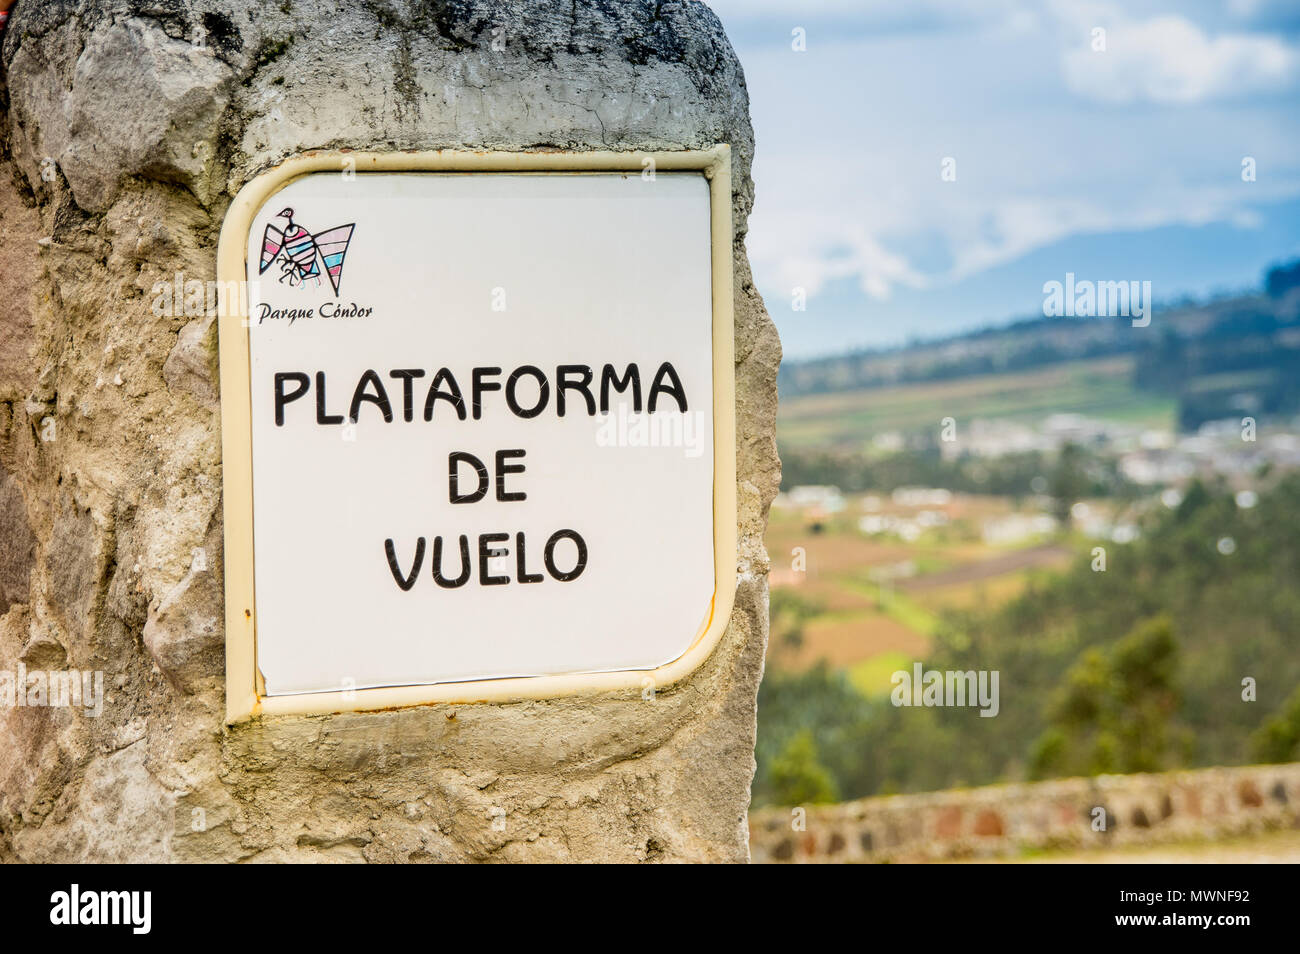 OTAVALO, ECUADOR - MAY 29, 2018: Outdoor view of informative sign of flight platform at the Condor Park in Otavalo Stock Photo